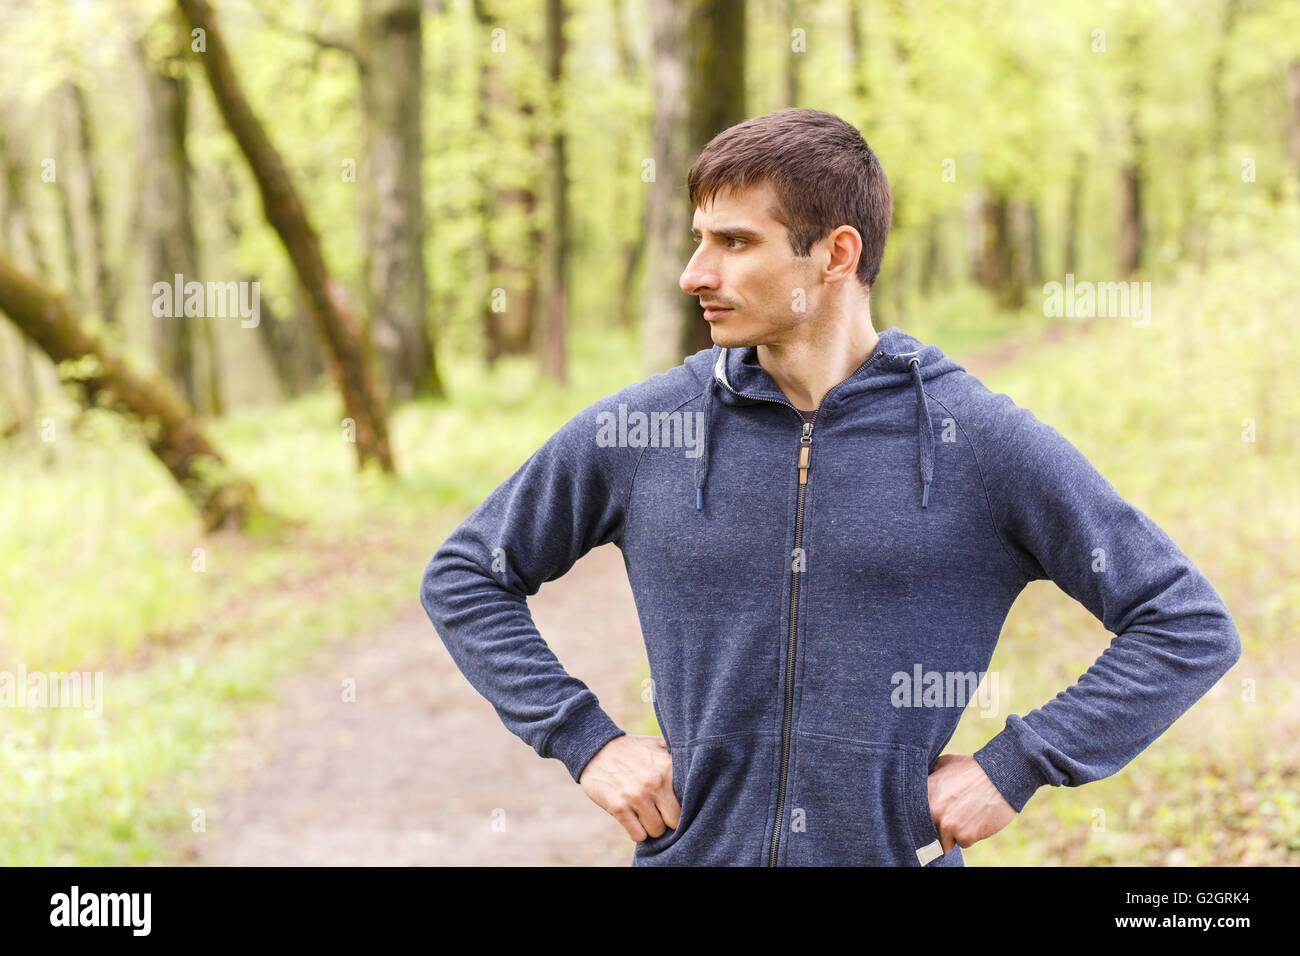 Young sportsman standing on the trail after jogging. Athletic man standing on running track Stock Photo